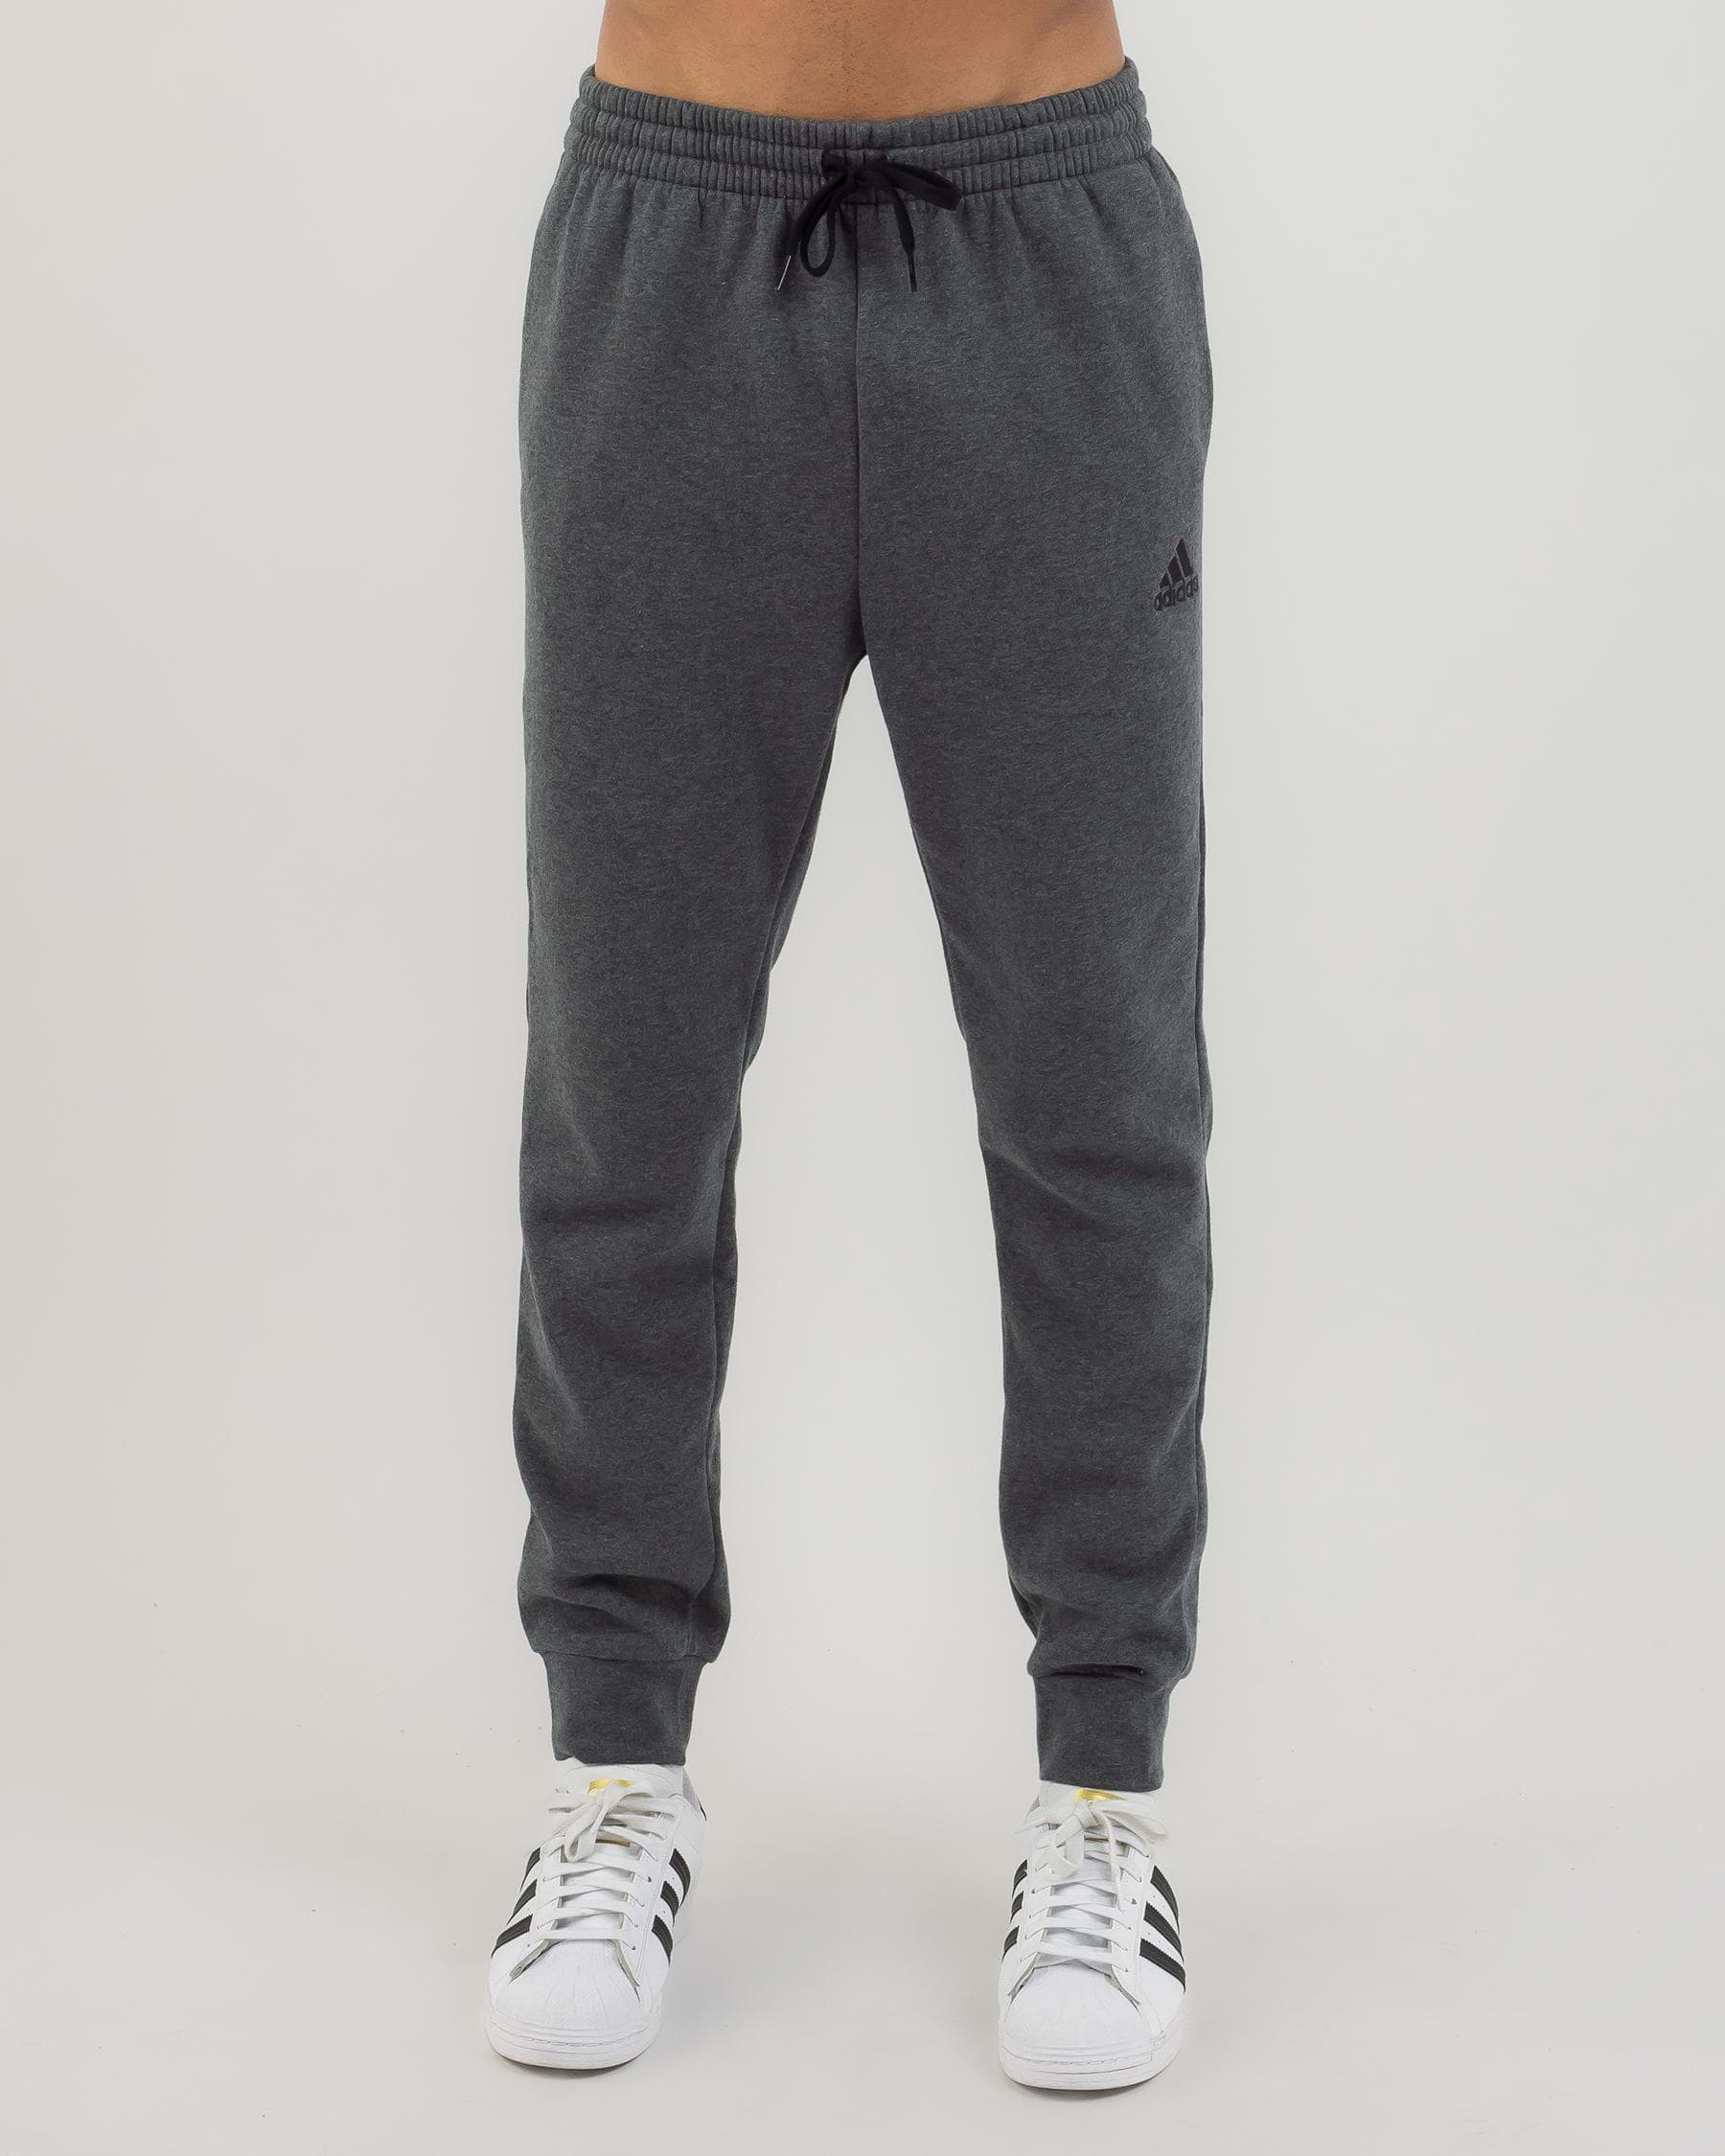 shree shiv fashion Solid Men Grey Track Pants - Buy shree shiv fashion  Solid Men Grey Track Pants Online at Best Prices in India | Flipkart.com